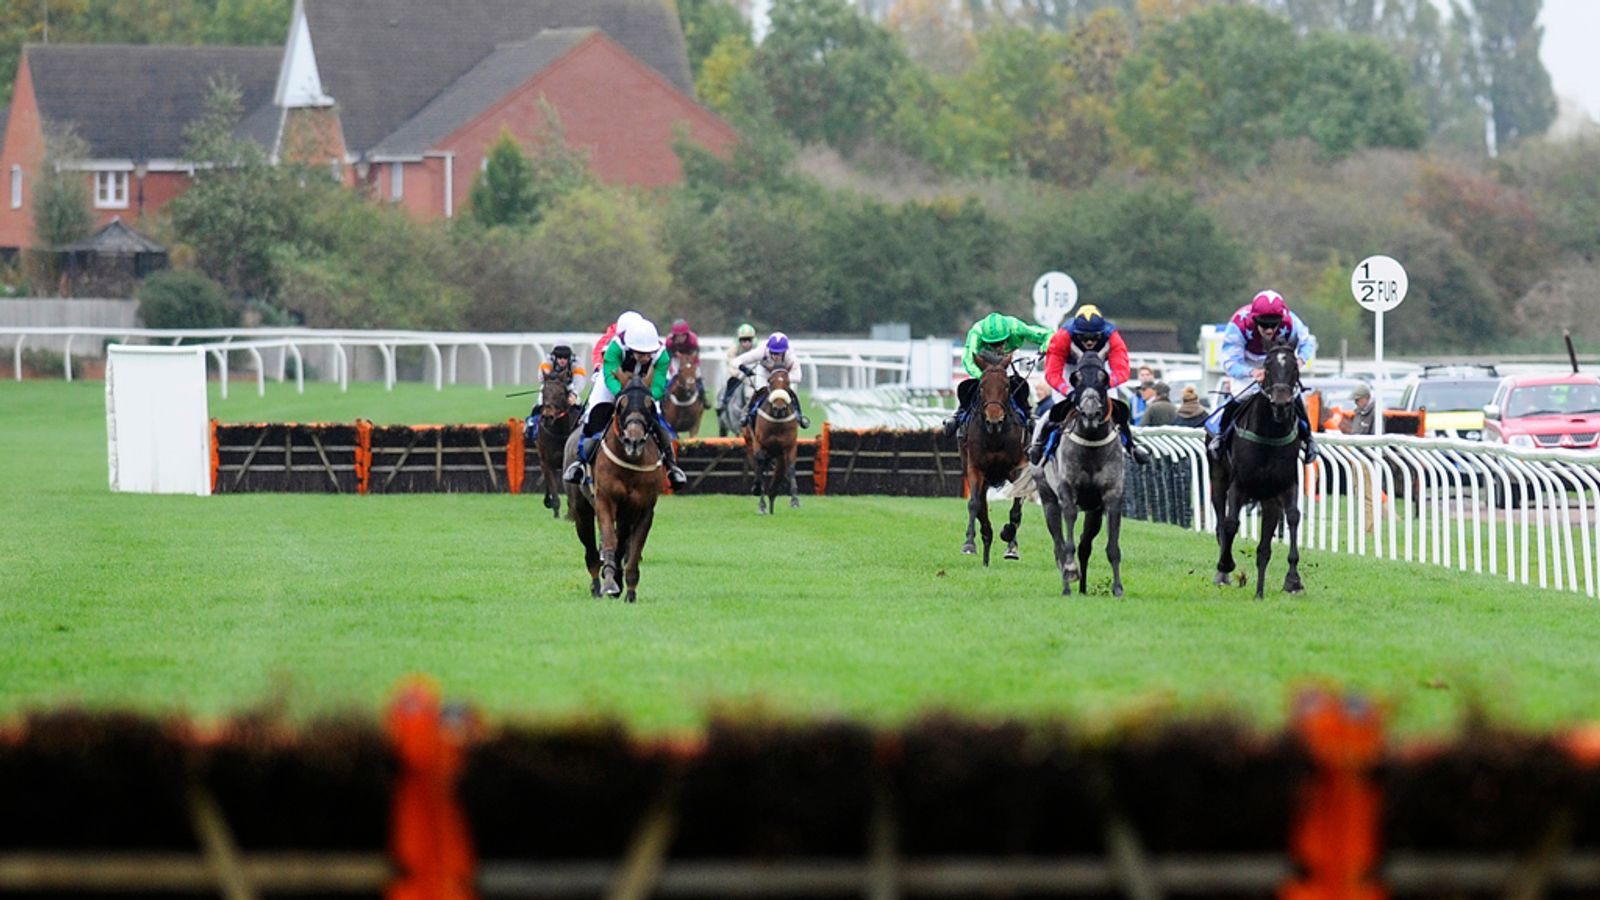 Stratford race times on Sunday brought forward due to heatwave